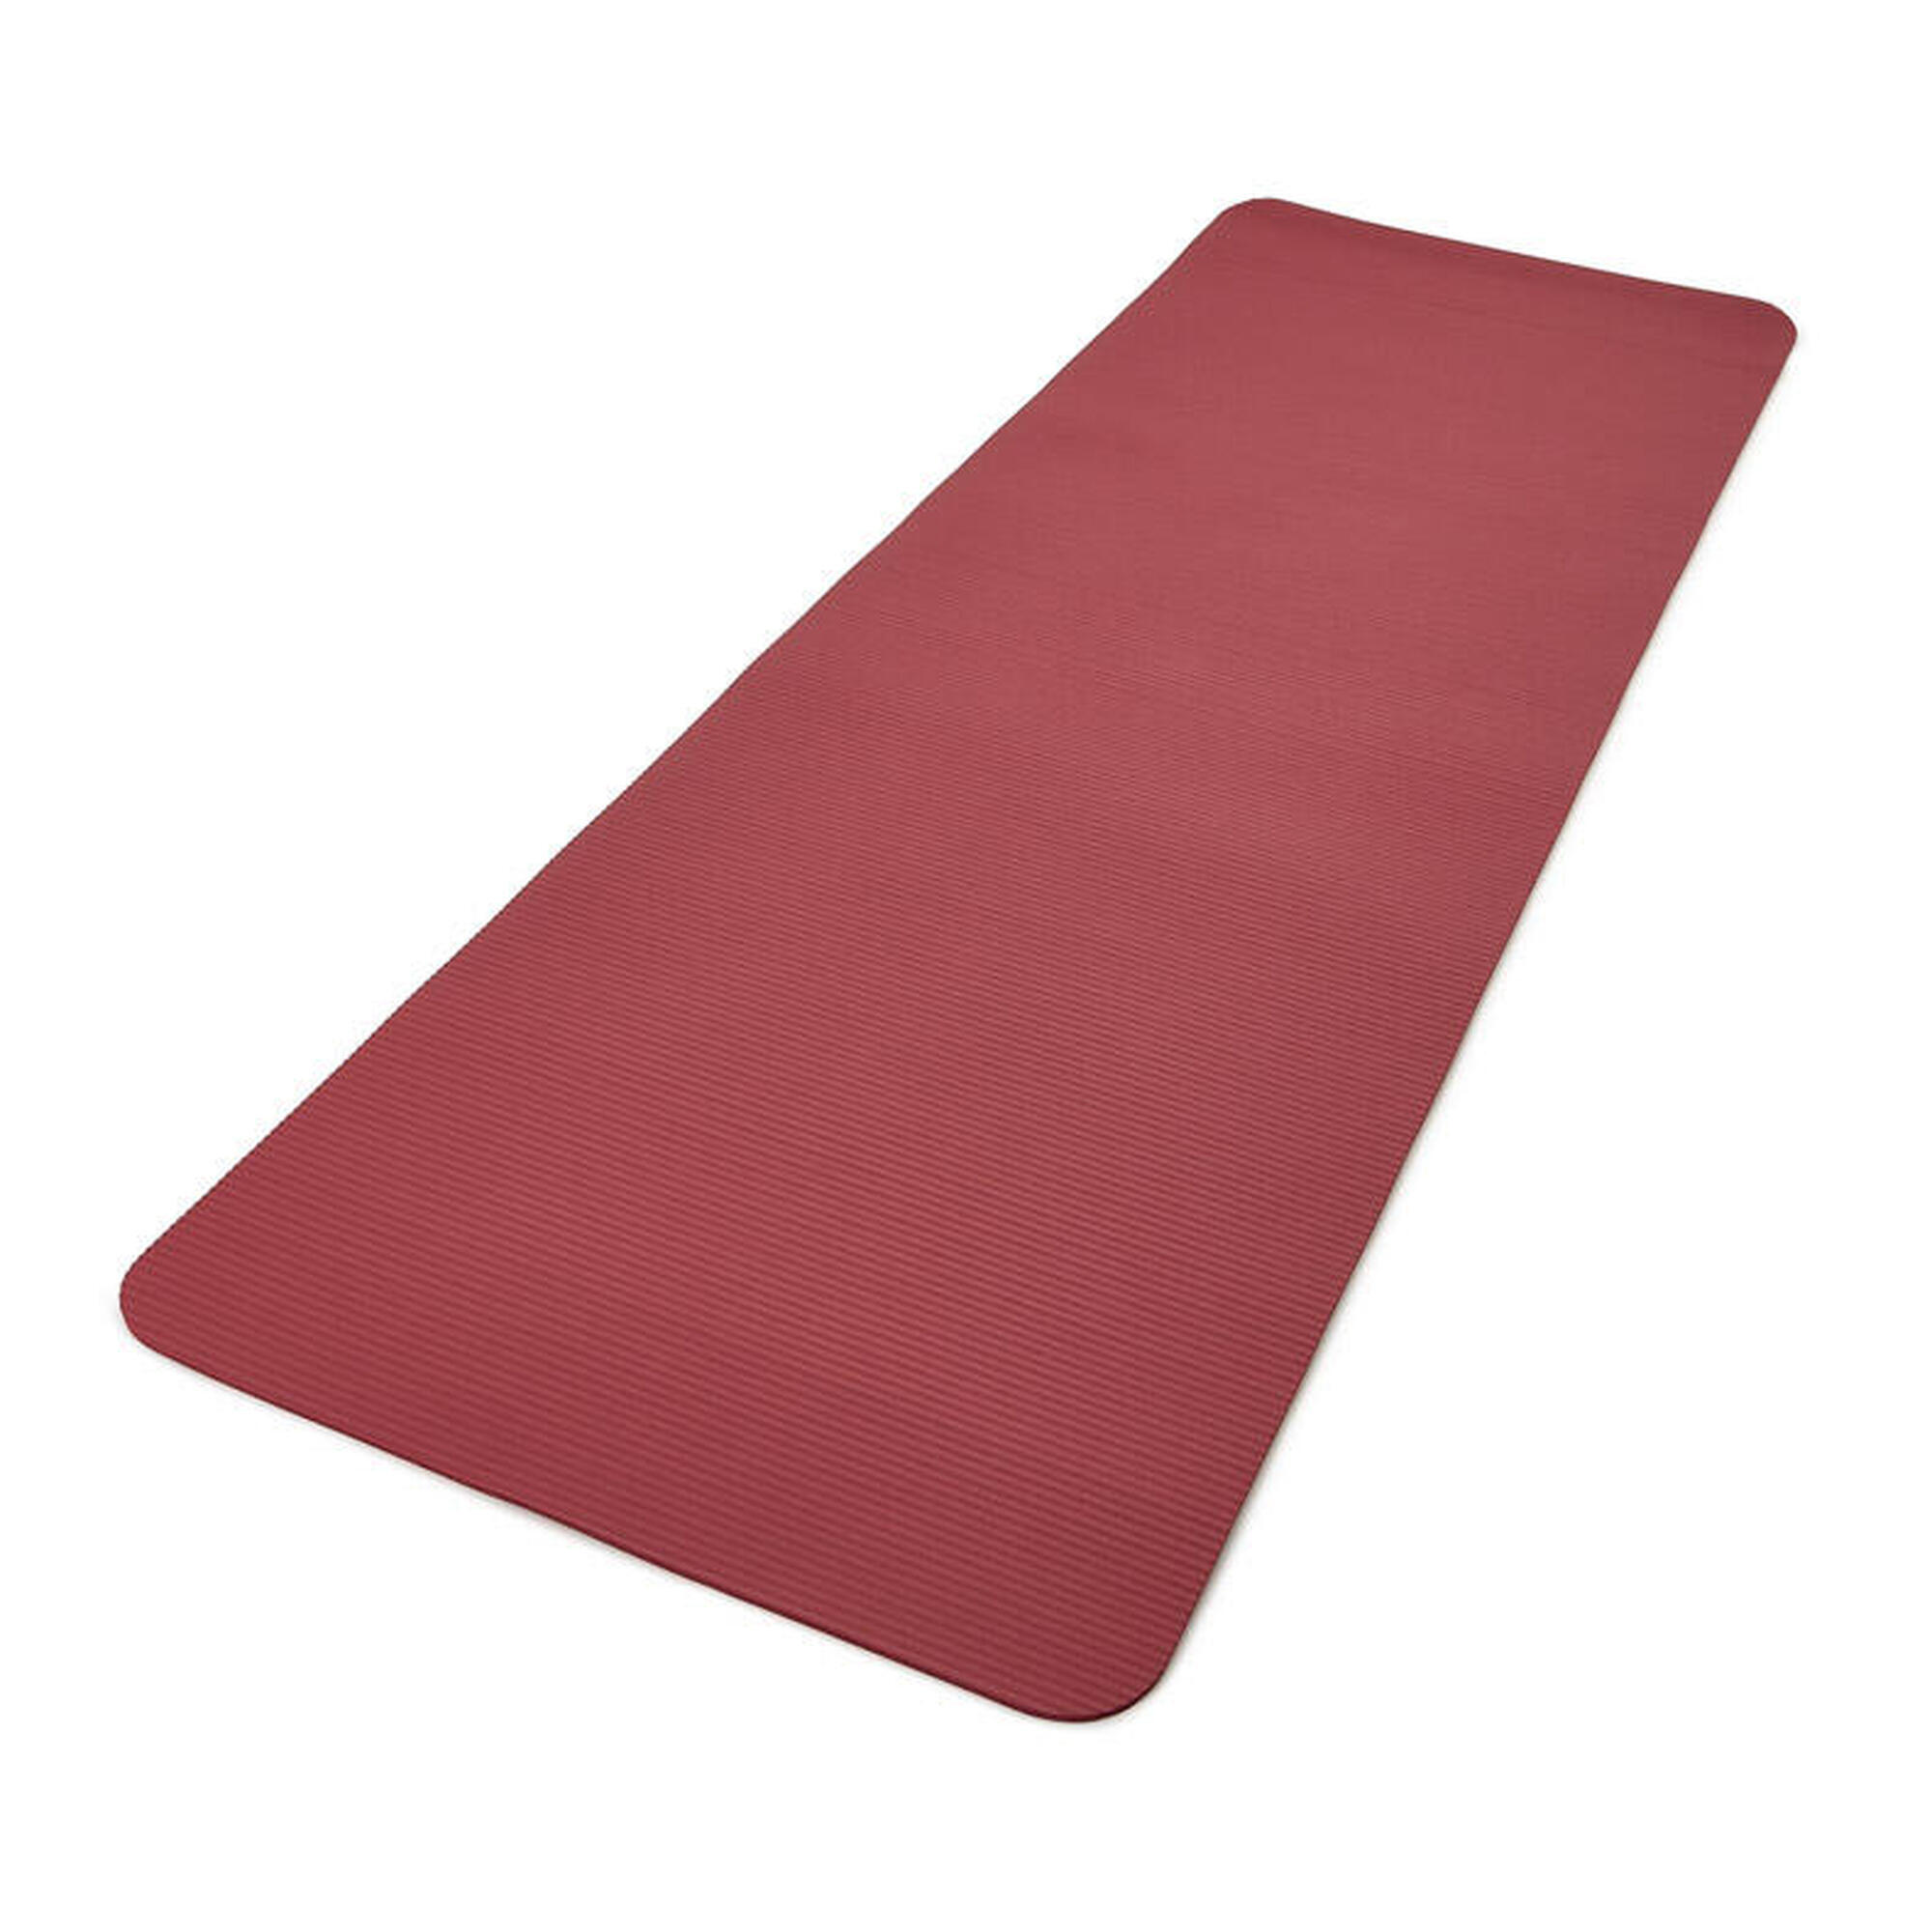 Tappetino di fitness Adidas - 7mm - Rosso